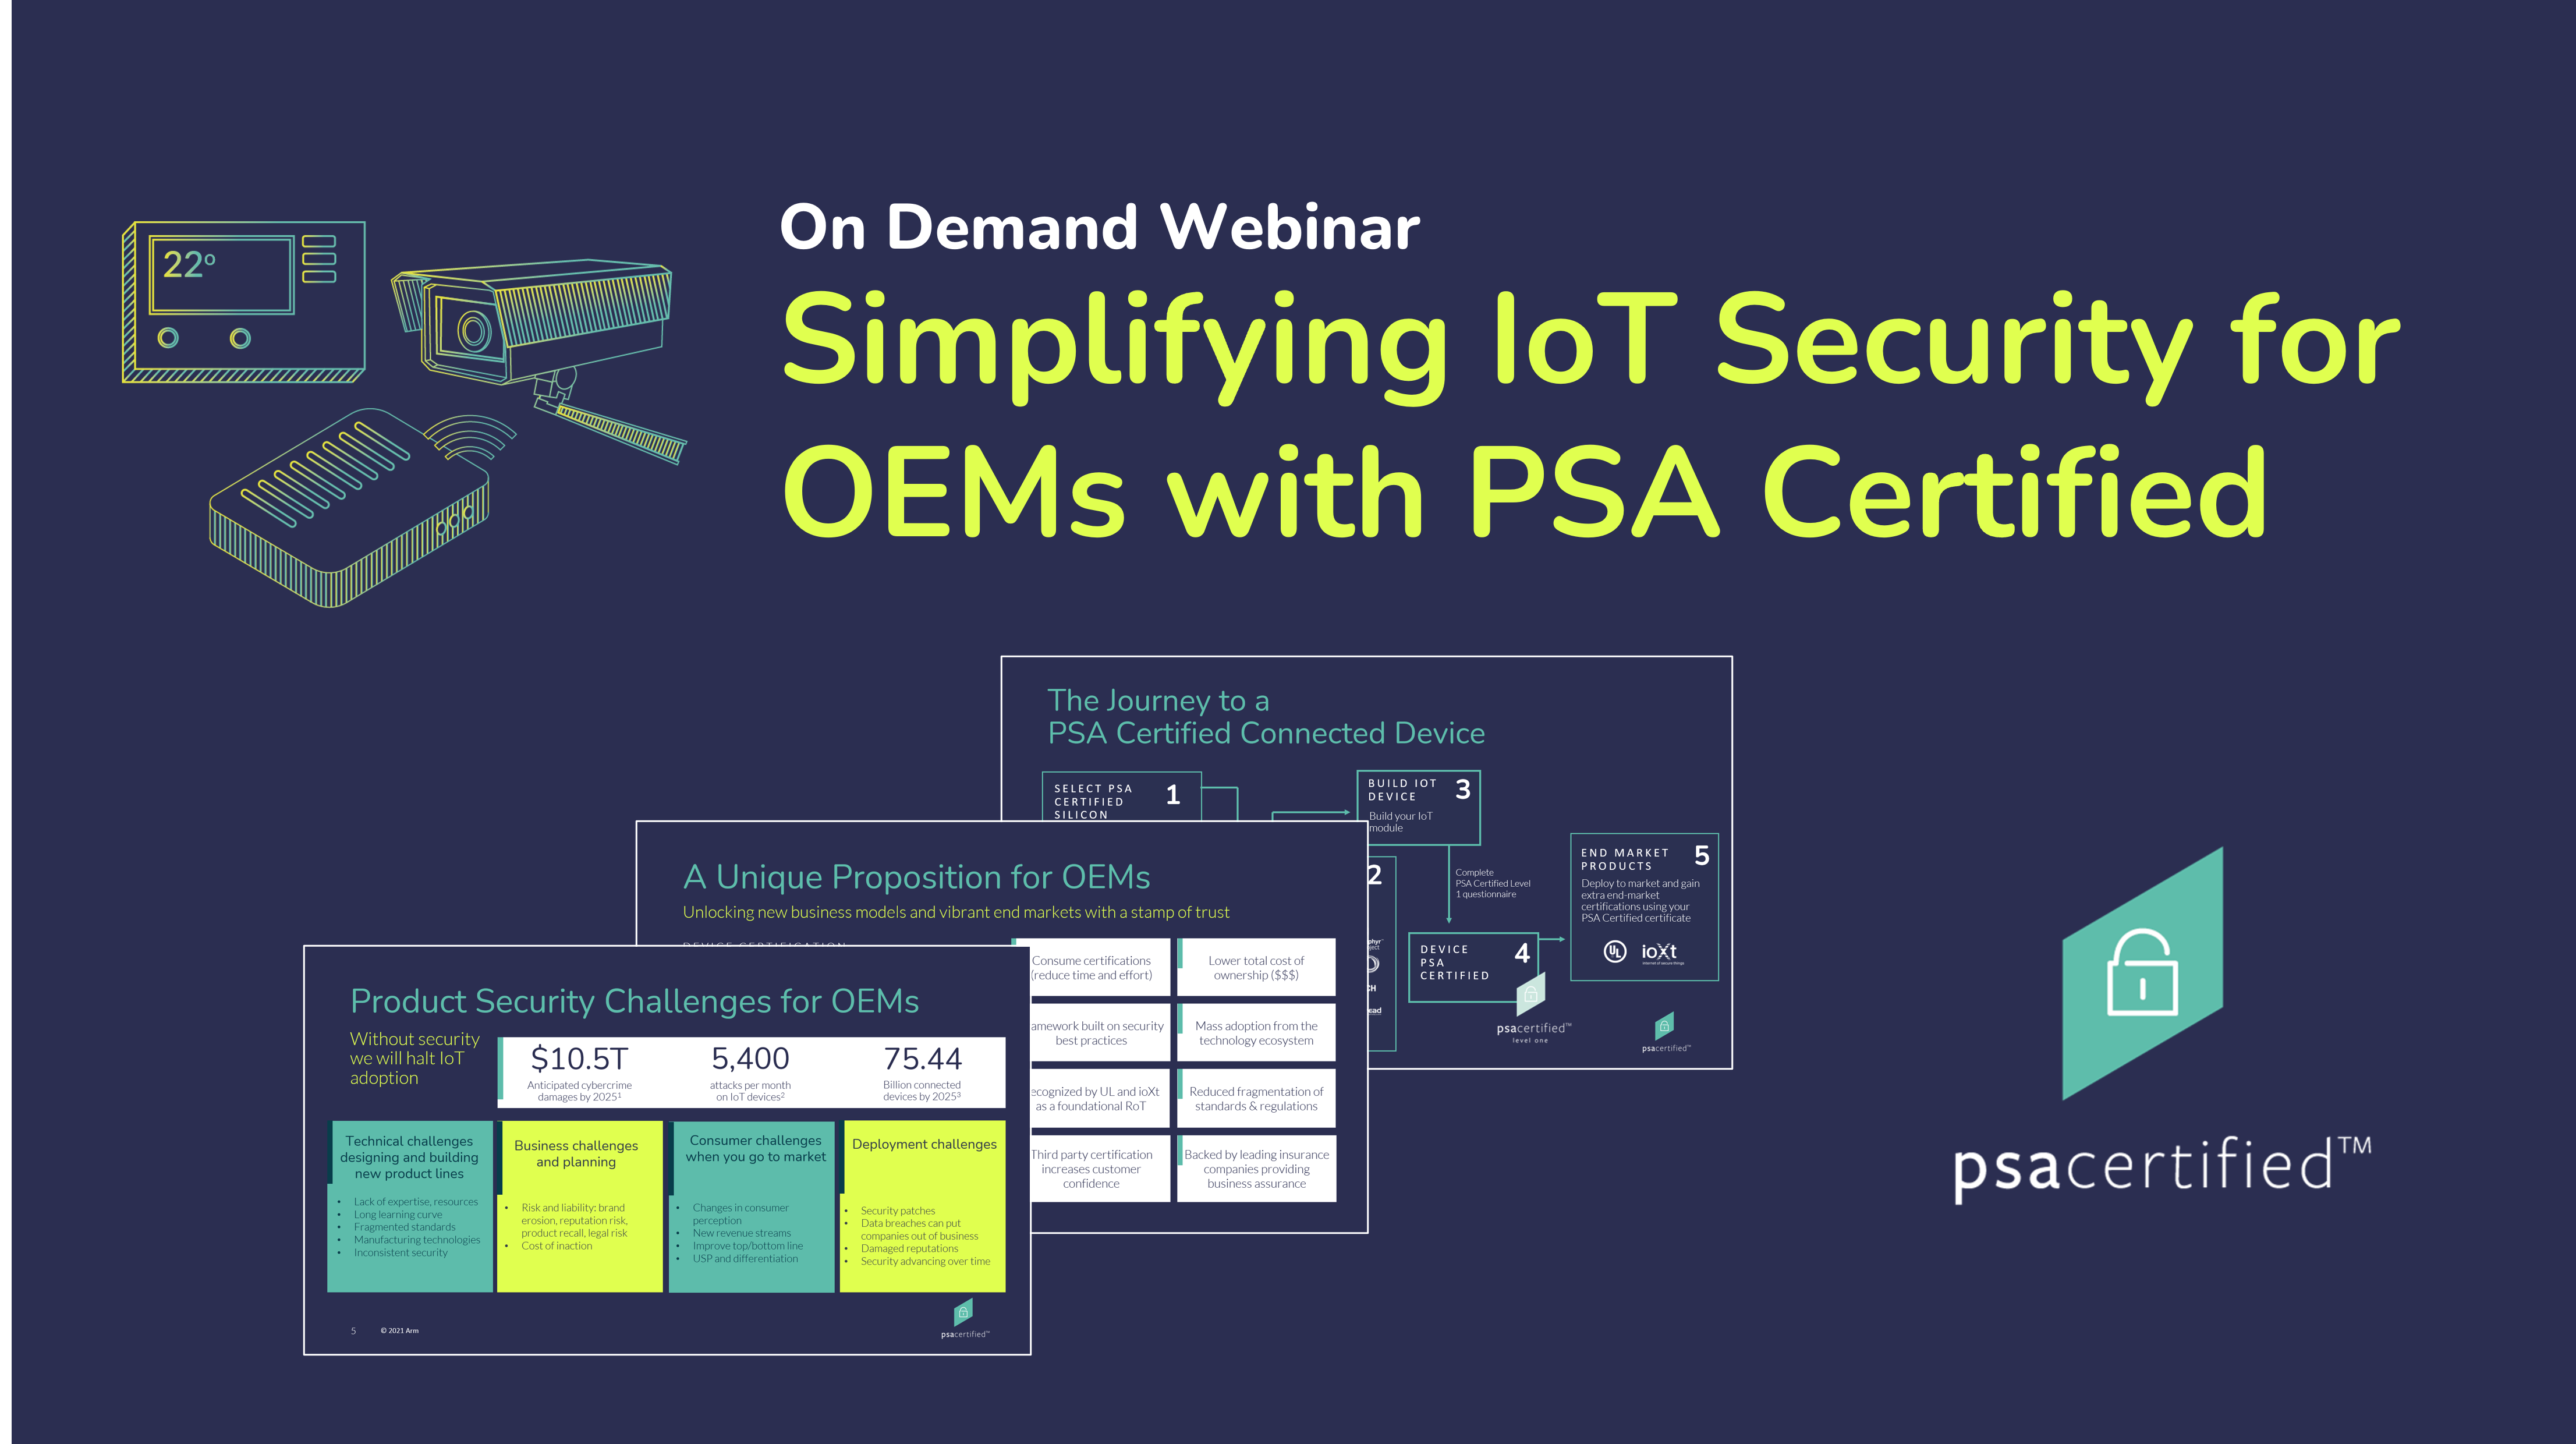 Watch our on-demand webinar to learn more about IoT security challenges for OEMs and how PSA Certified offers a scalable solution. 